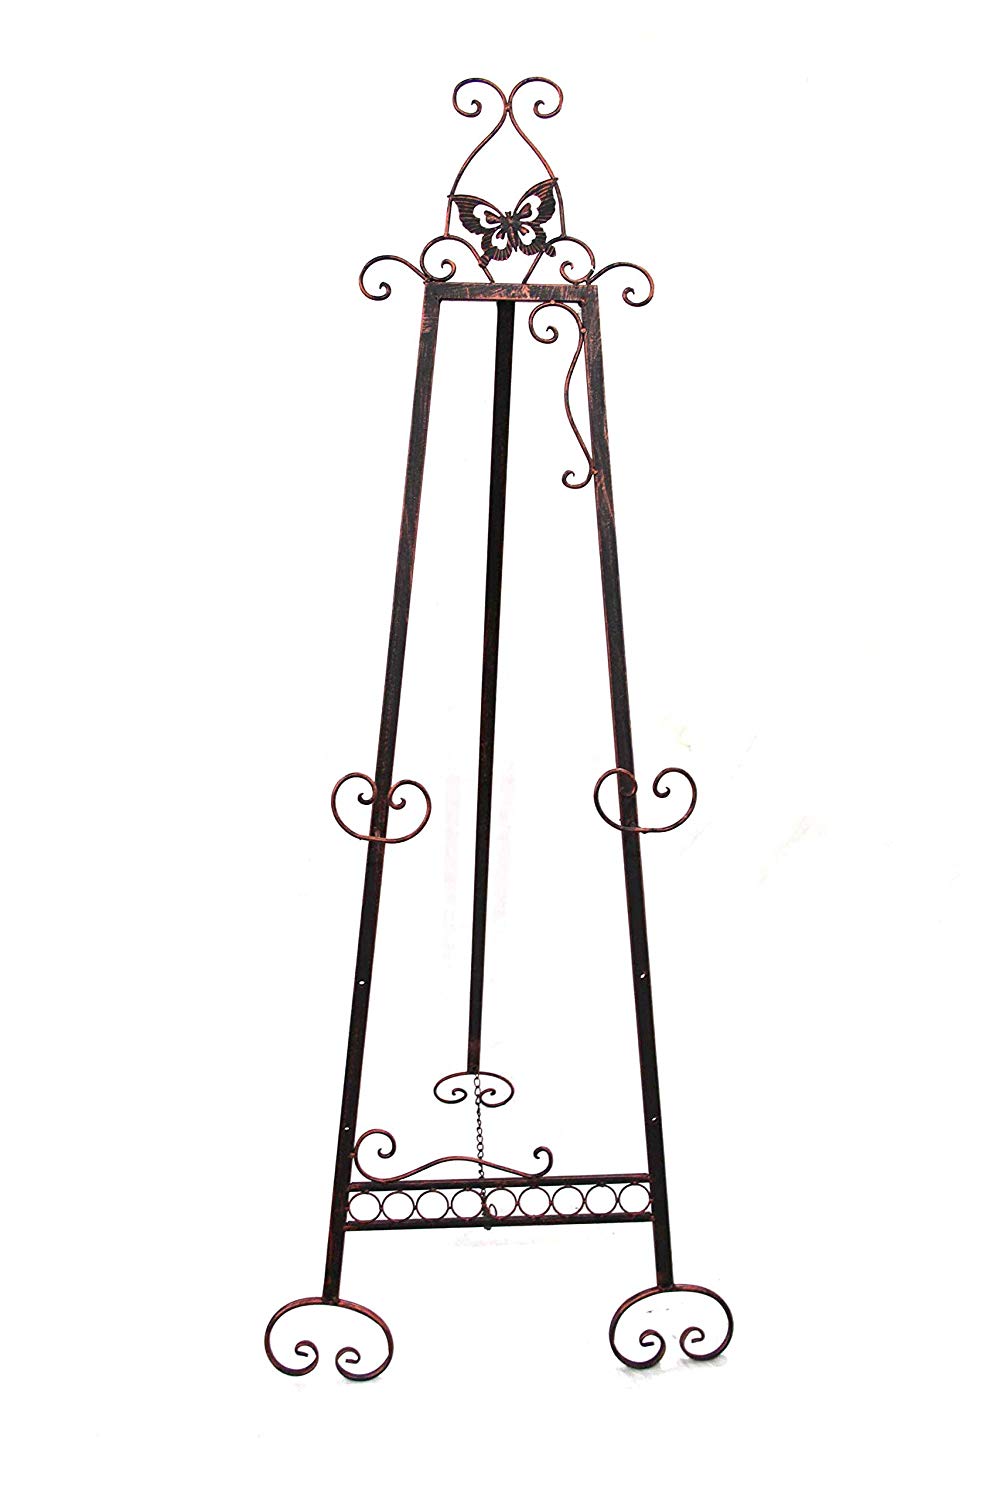 DesignStyles Decorative Metal Easel Stand - Bronze